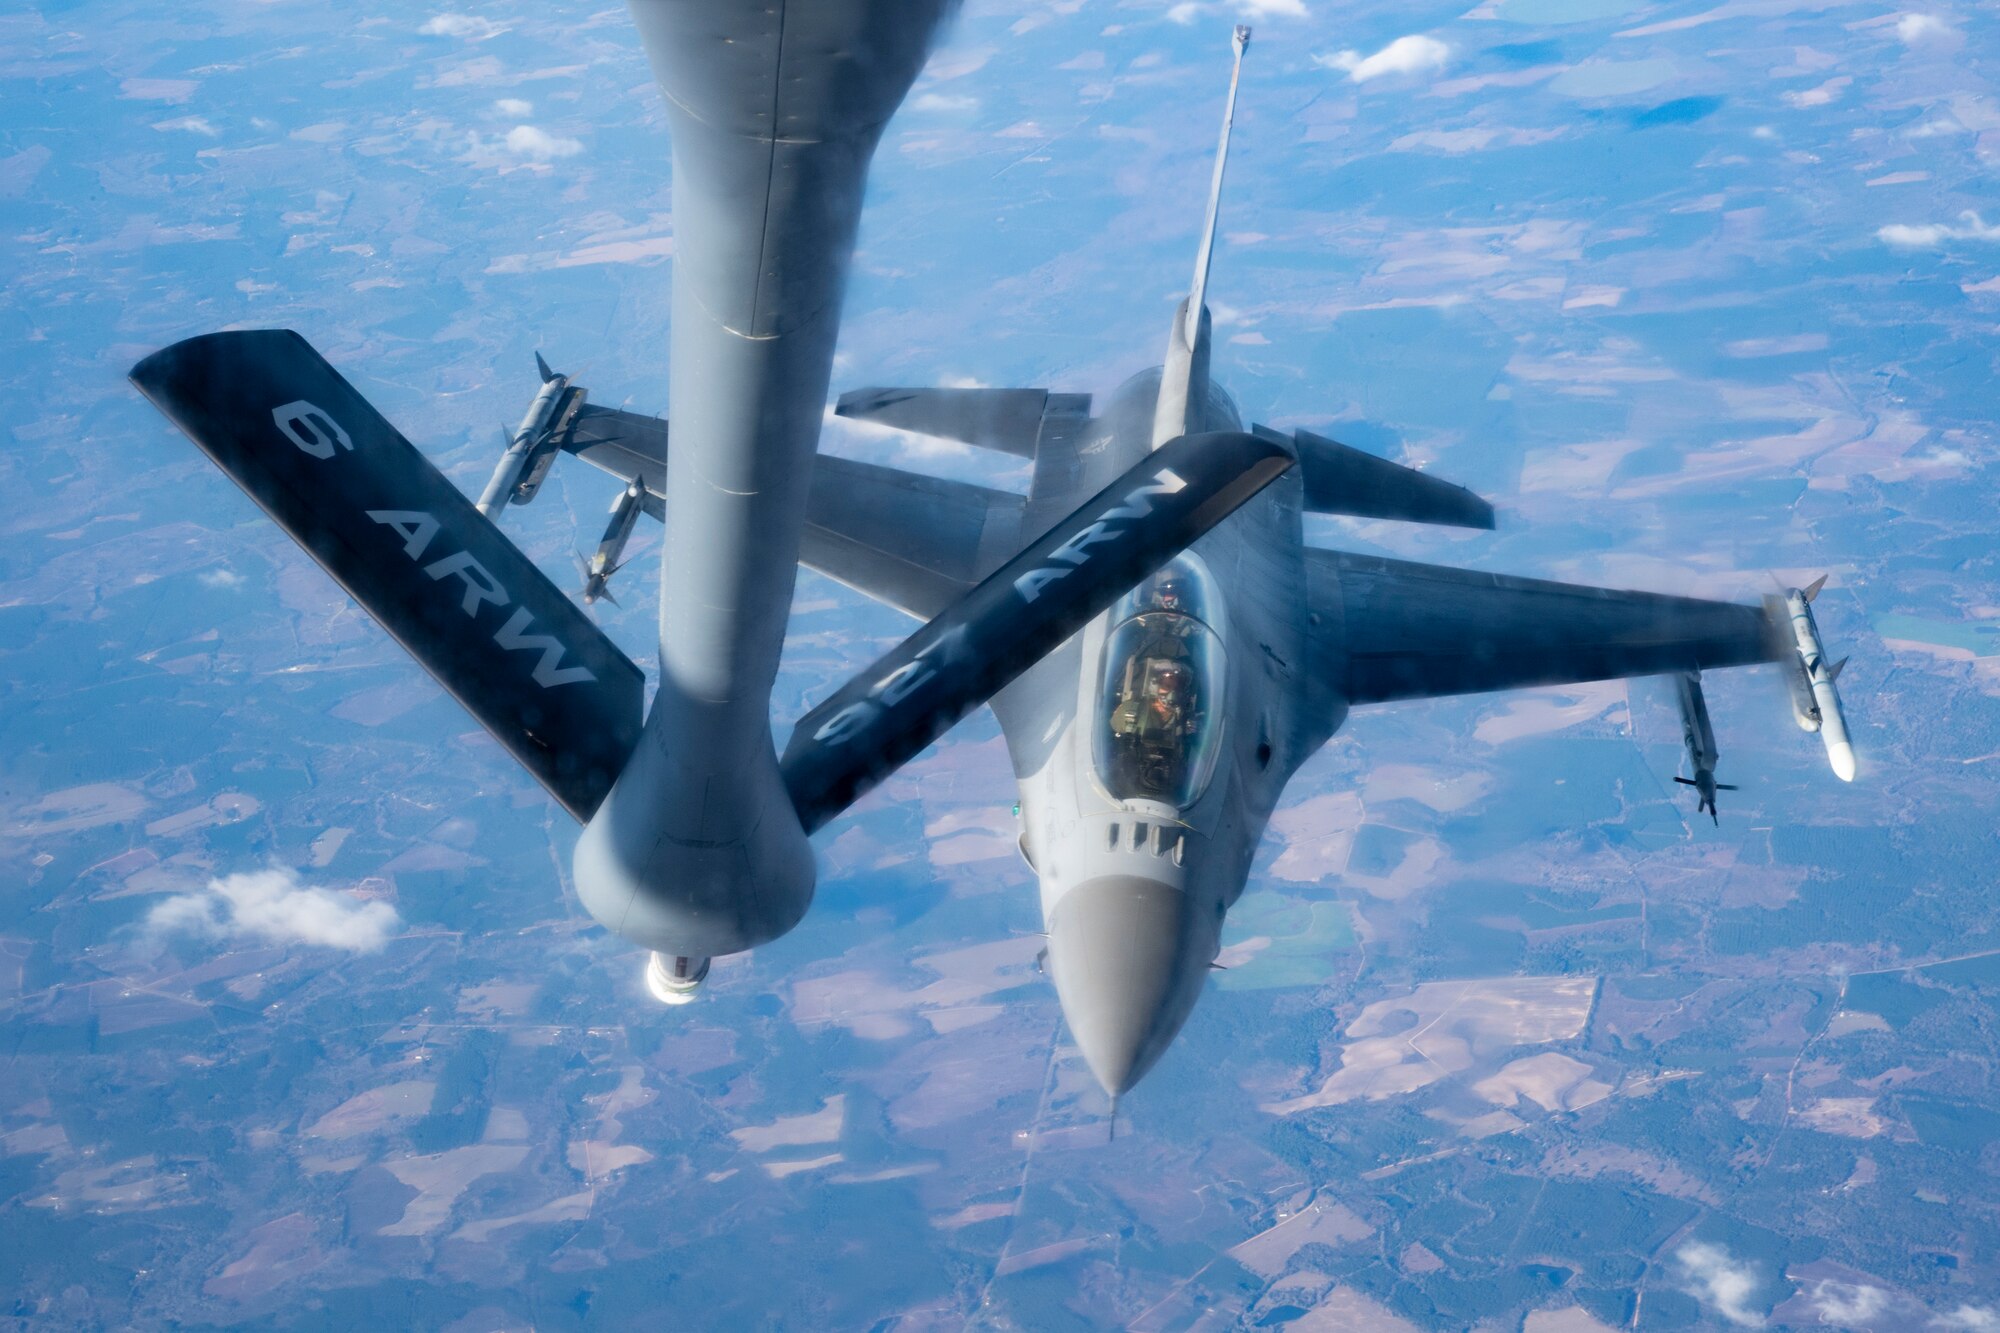 An F-16 Fighting Falcon aircraft assigned to Shaw Air Force Base (AFB), South Carolina, approaches a KC-135 Stratotanker from MacDill AFB, Fla., for air refueling support Dec. 1, 2020.